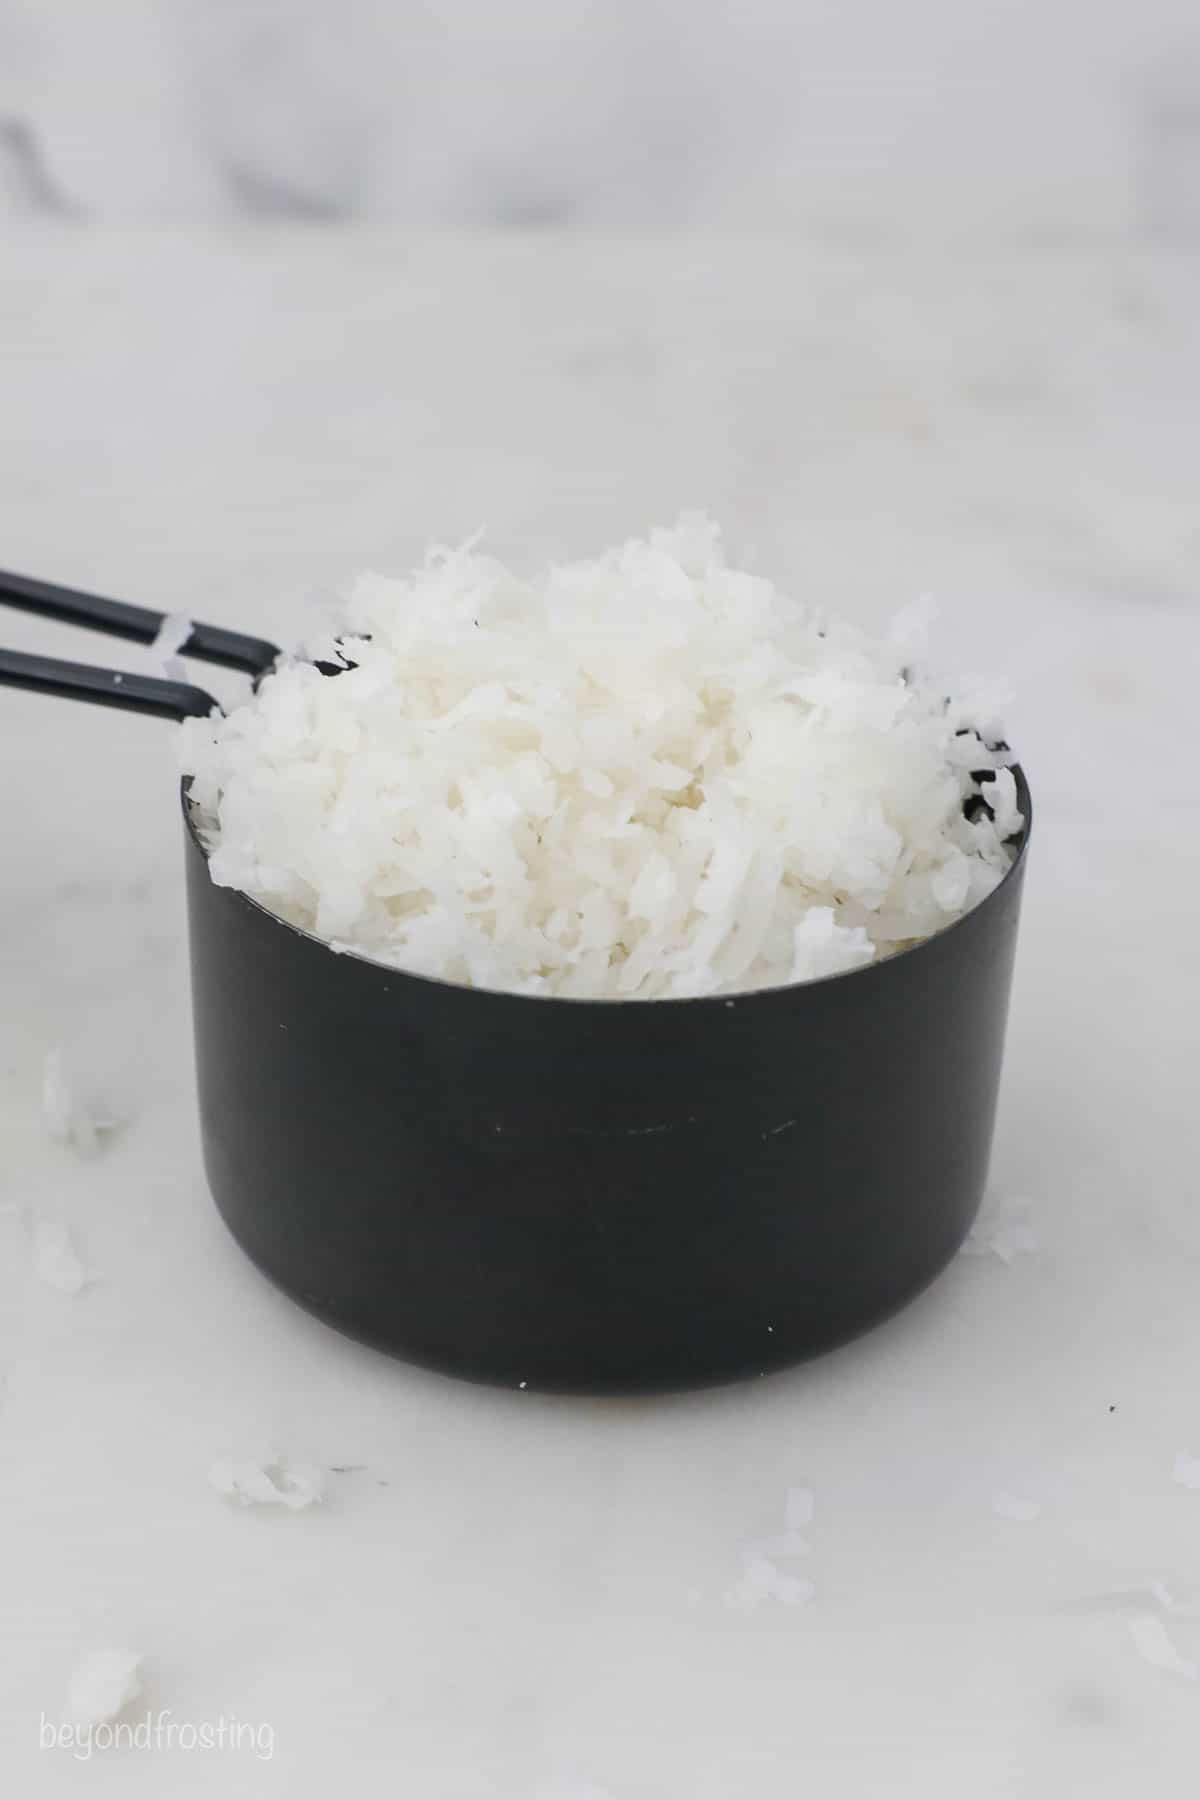 A meauring cup of coconut flakes